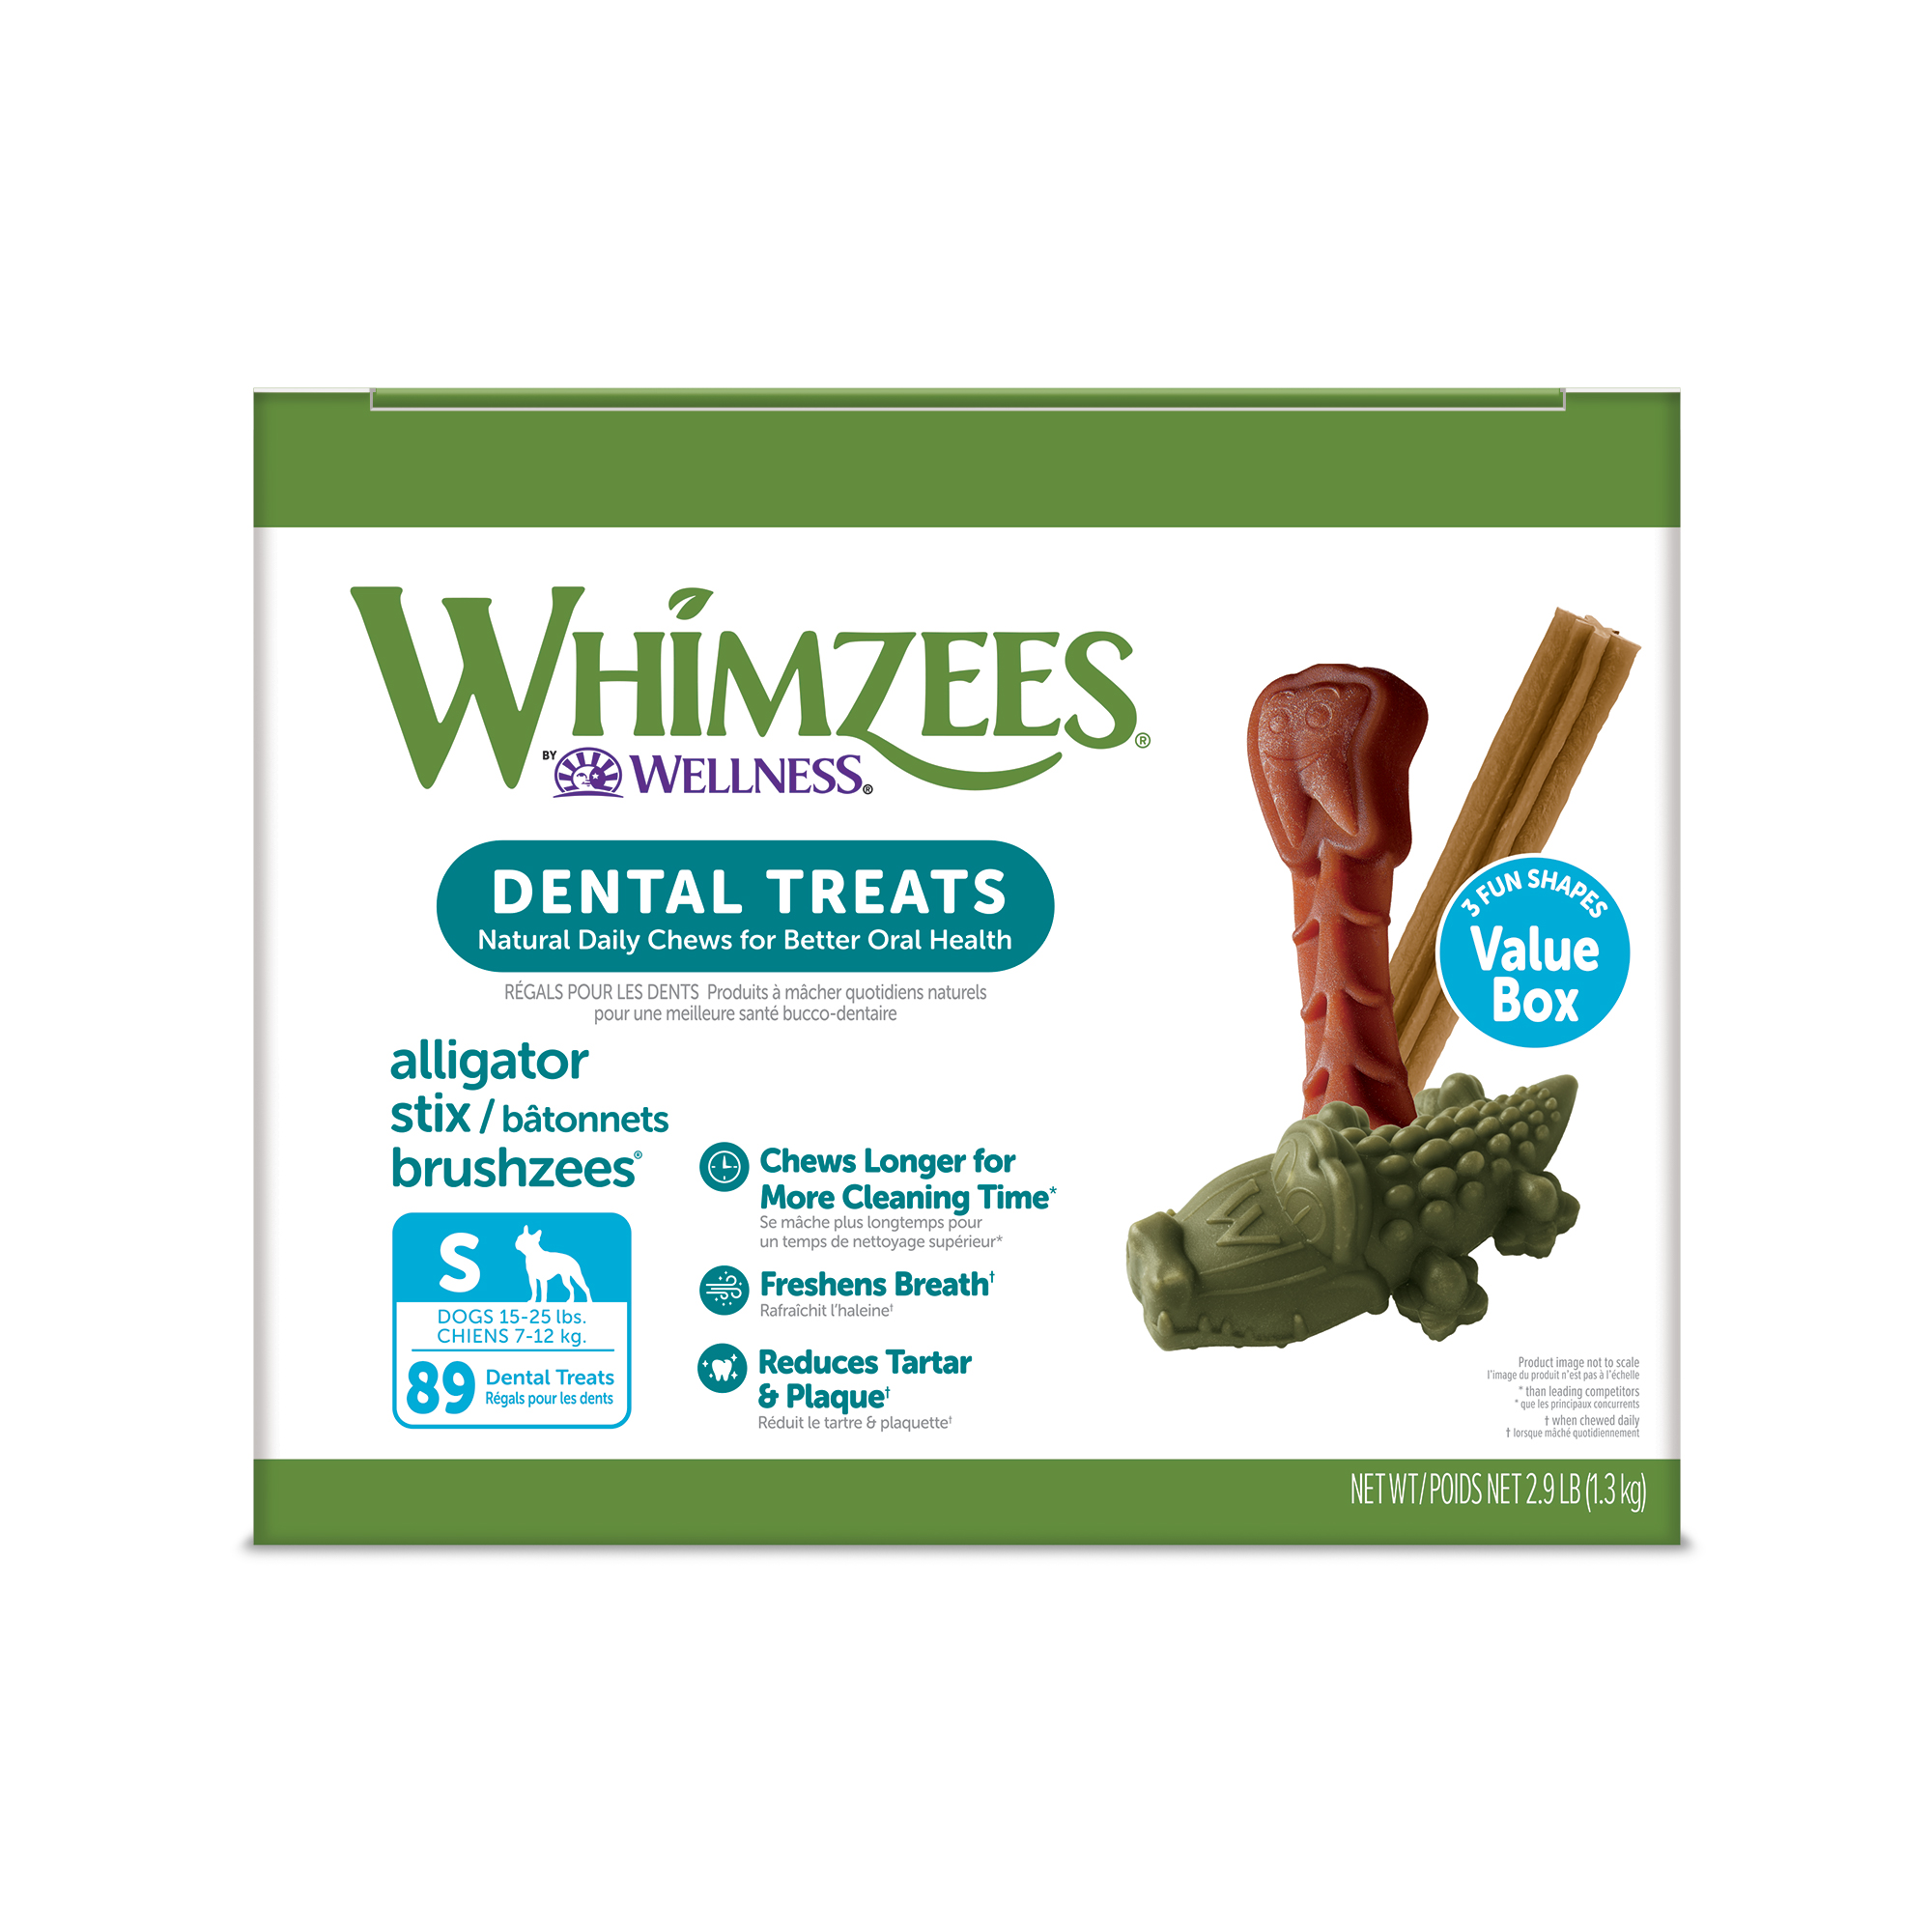 WHIMZEES Value Box Variety of Shapes